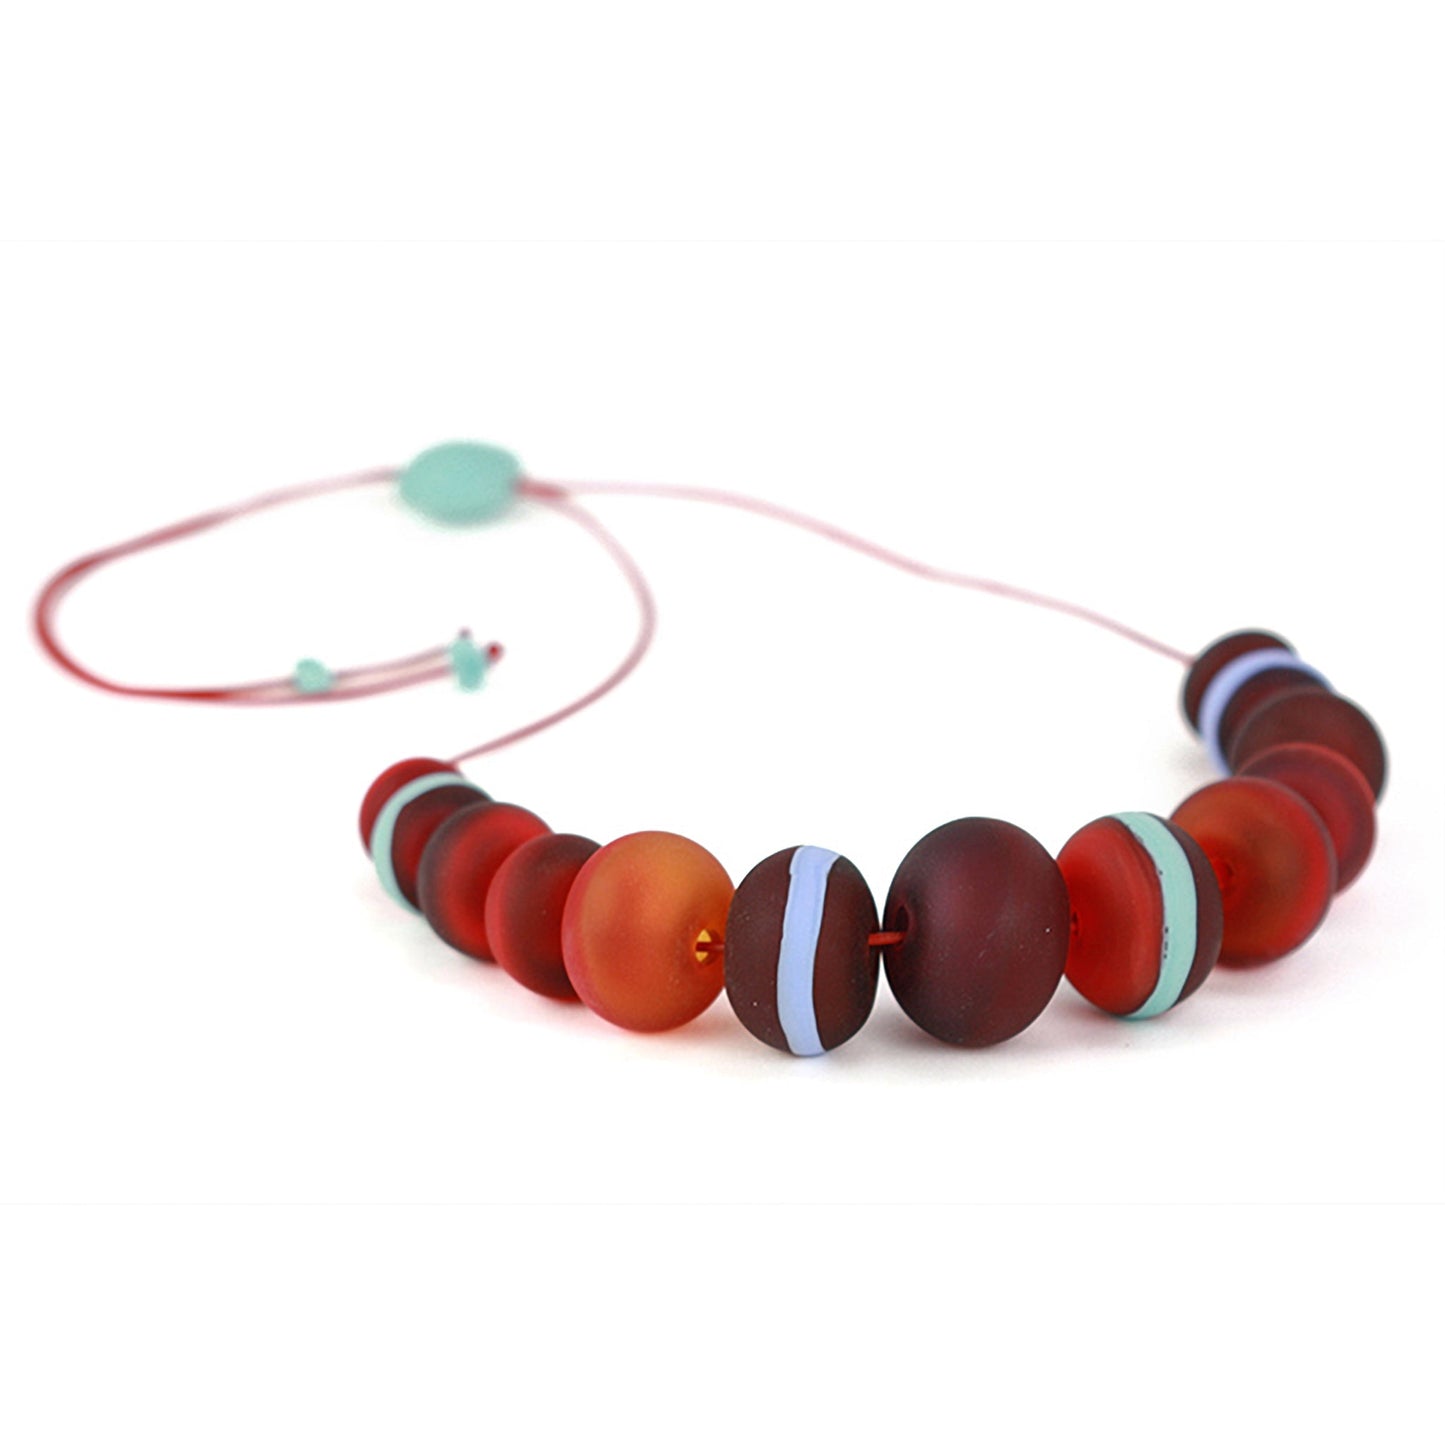 Soft stripes necklace-red, orange and blue